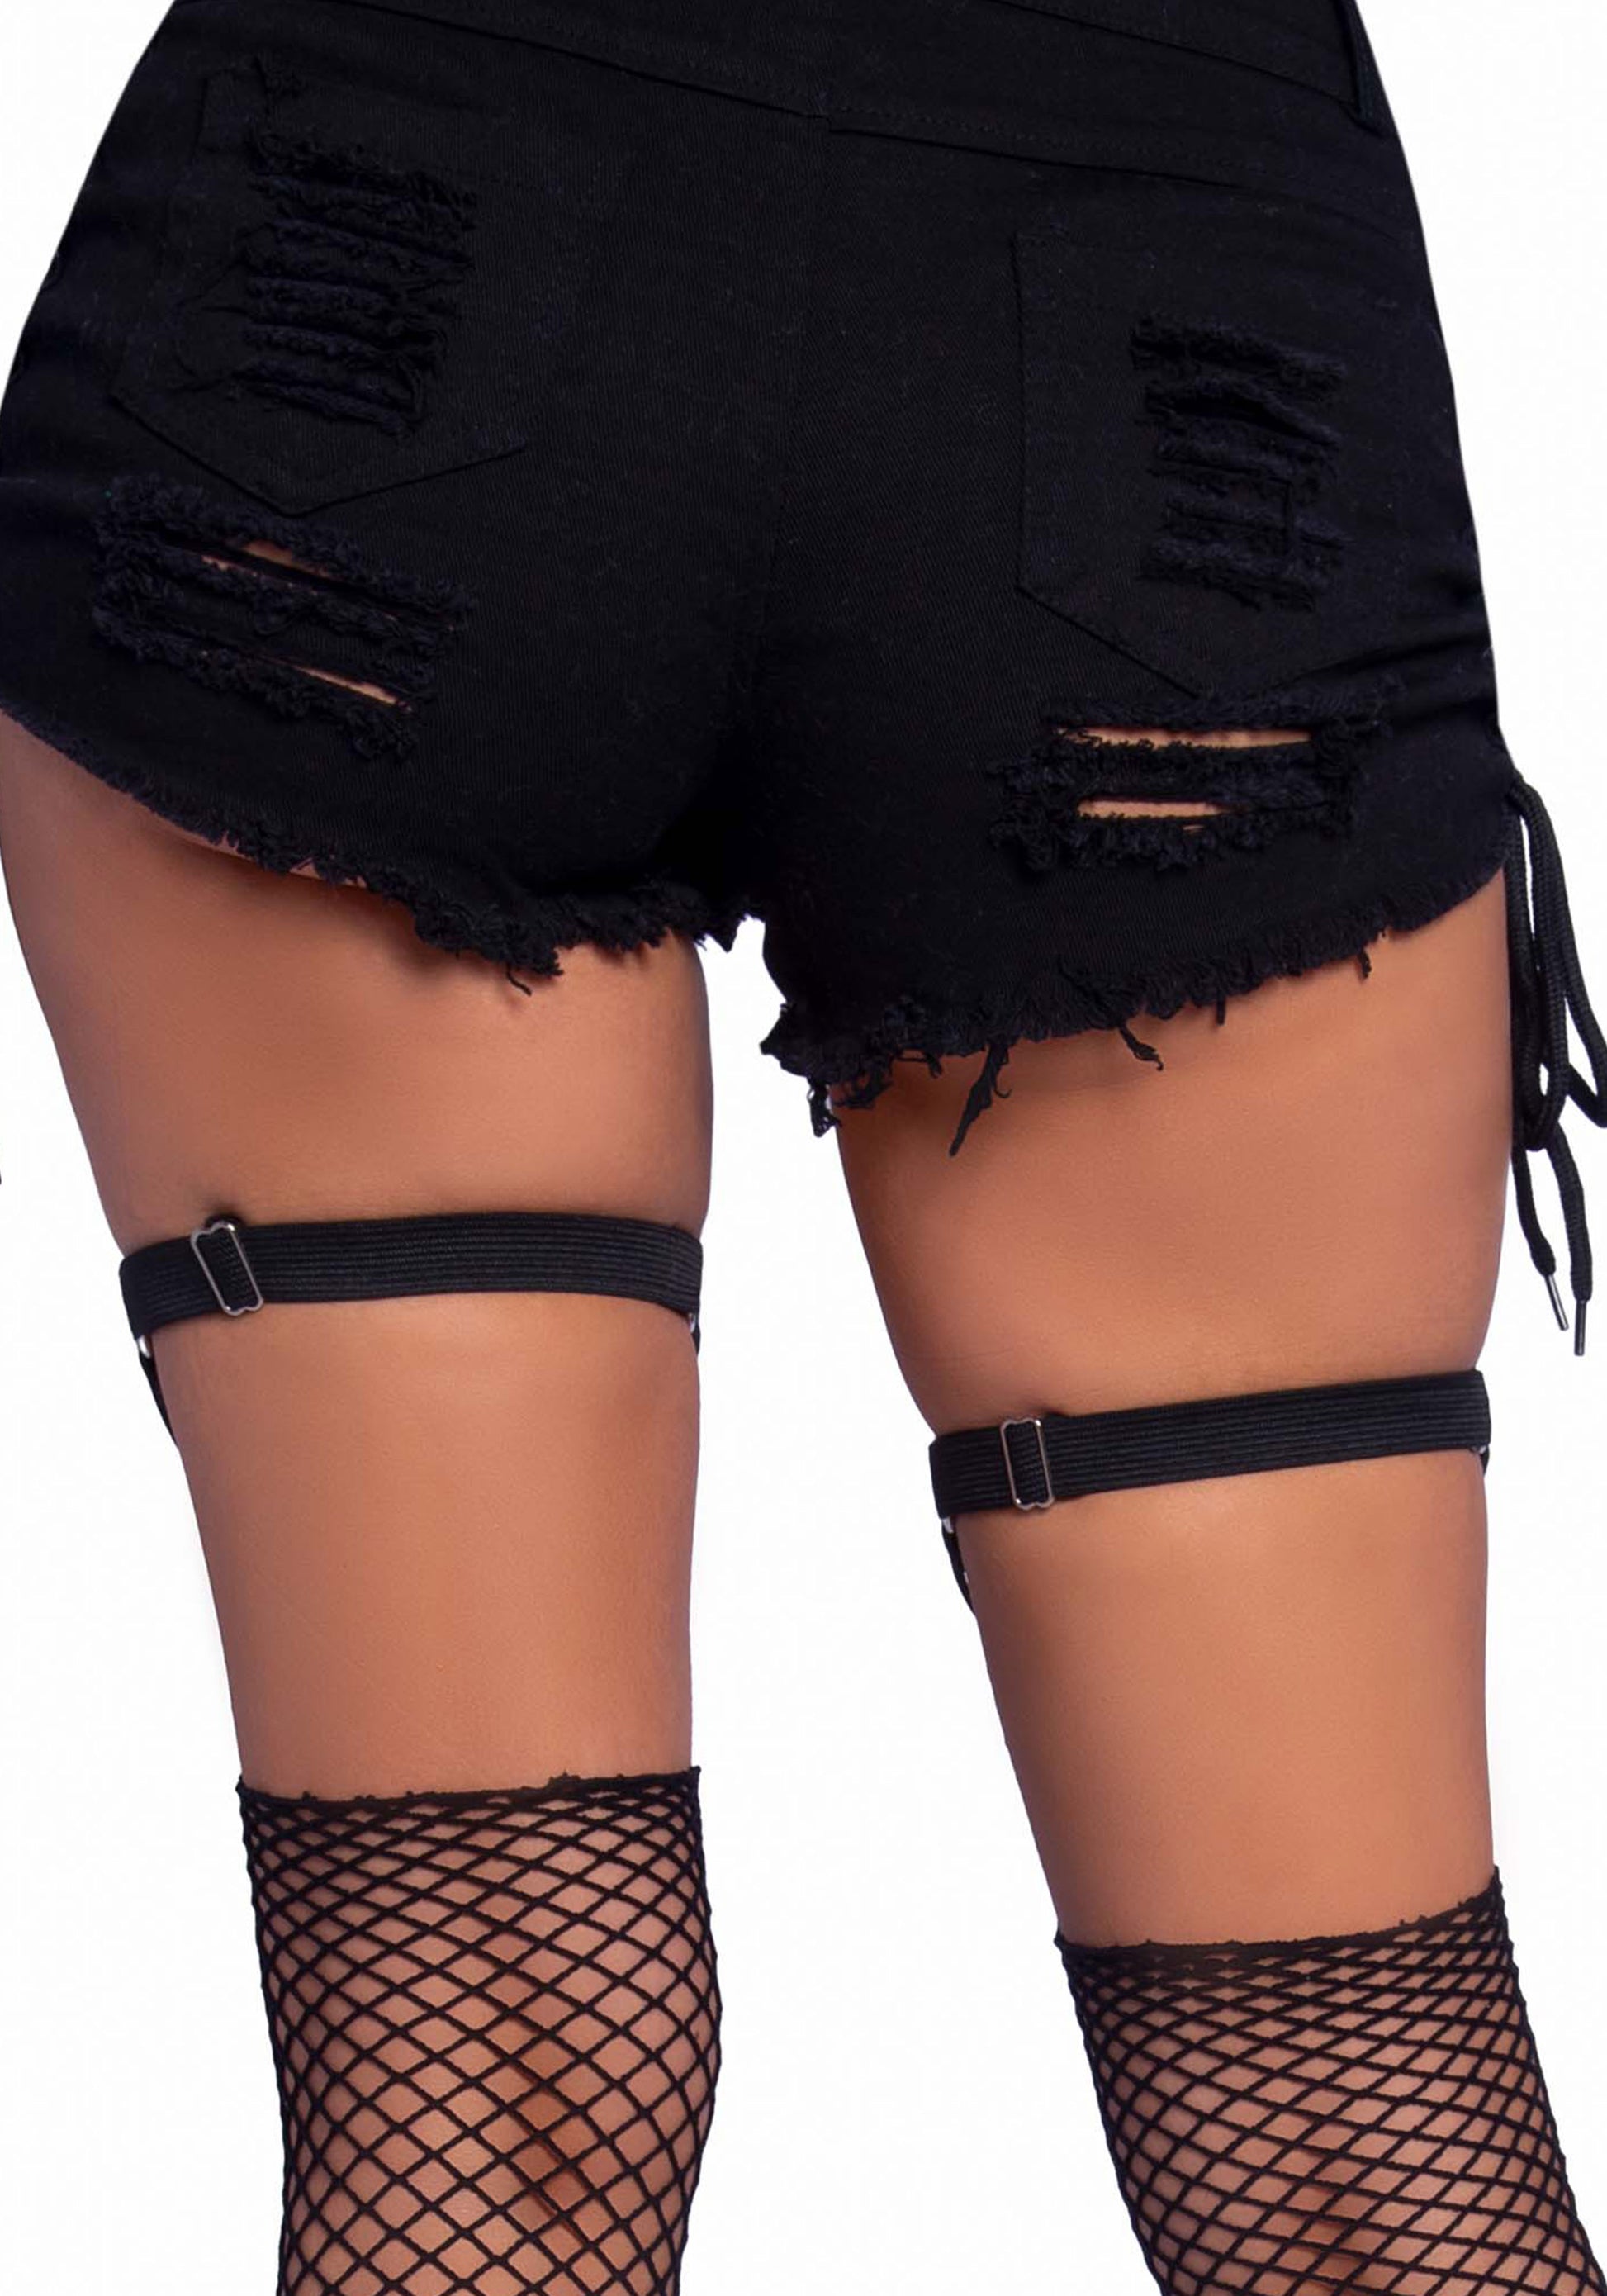 Leg Avenue 2783 Bat O-Ring Garter - Black faux leather bat style studded adjustable thigh high garter suspenders with chain detail, ideal for wearing with stockings and thigh-high socks.